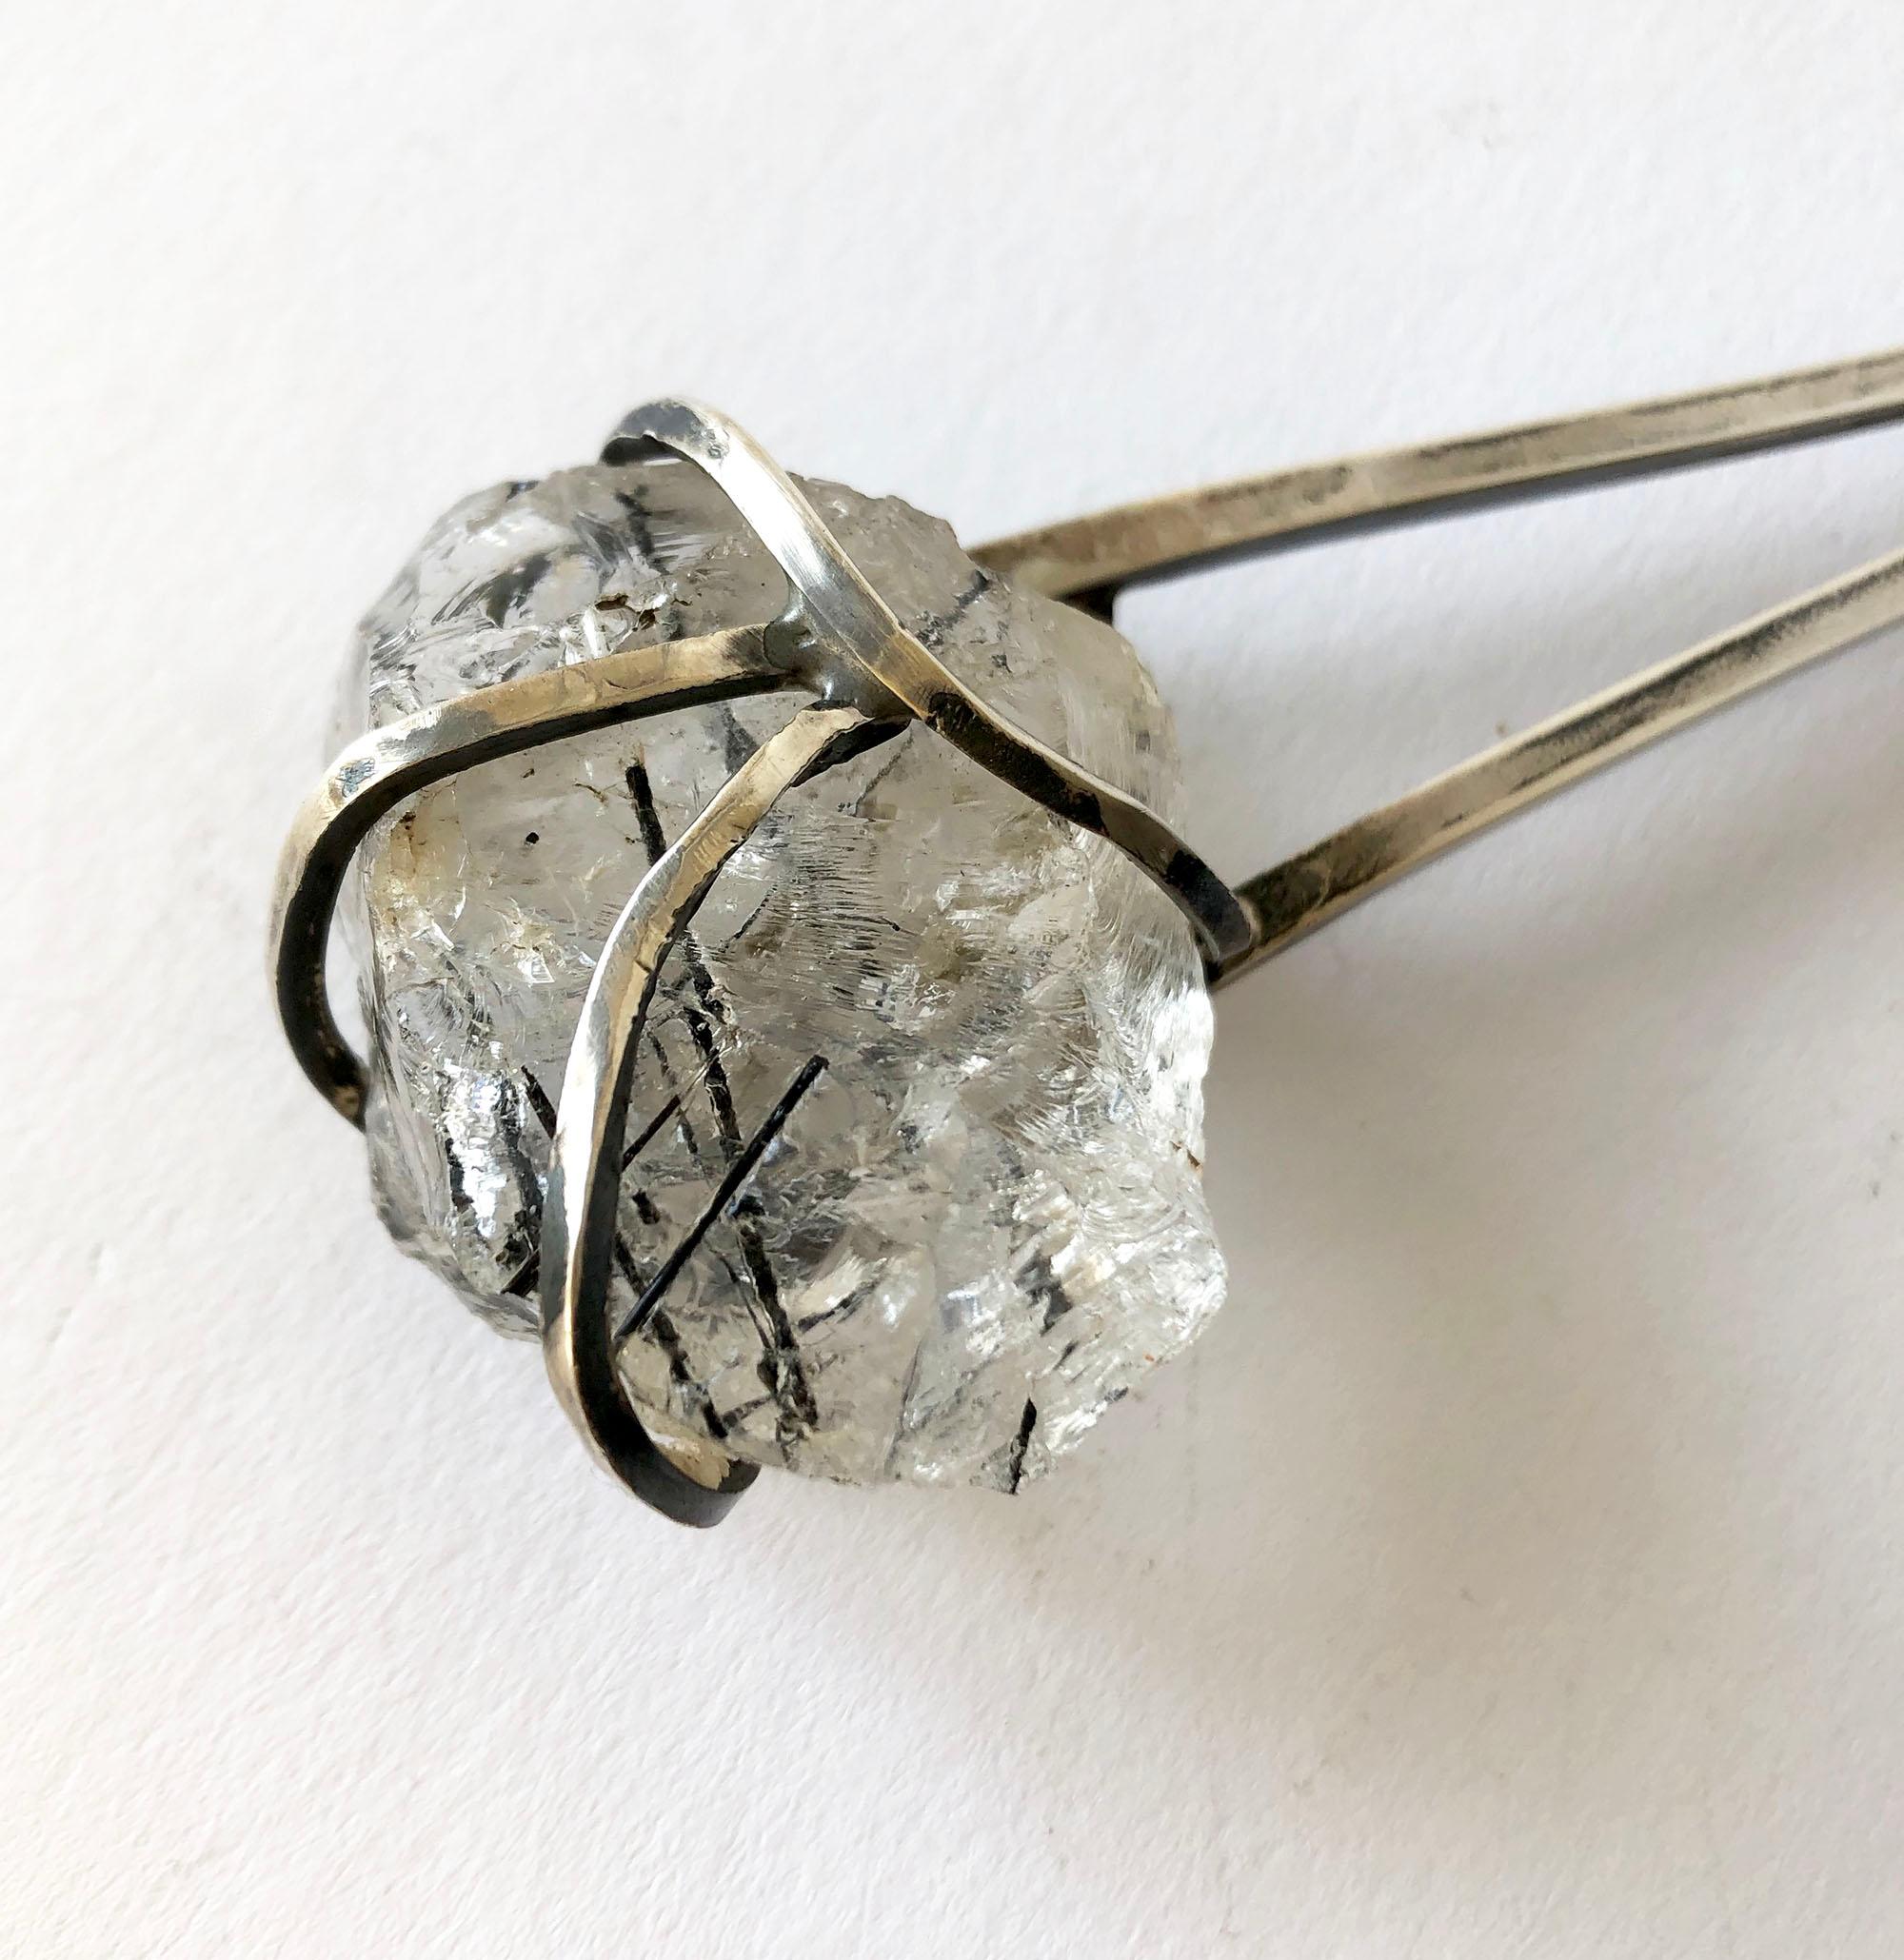 Sterling silver cocktail stirrer with large rutilated quartz stone created by Adda Husted-Andersen of Copenhagen, Denmark. Stirrer measures 1.75